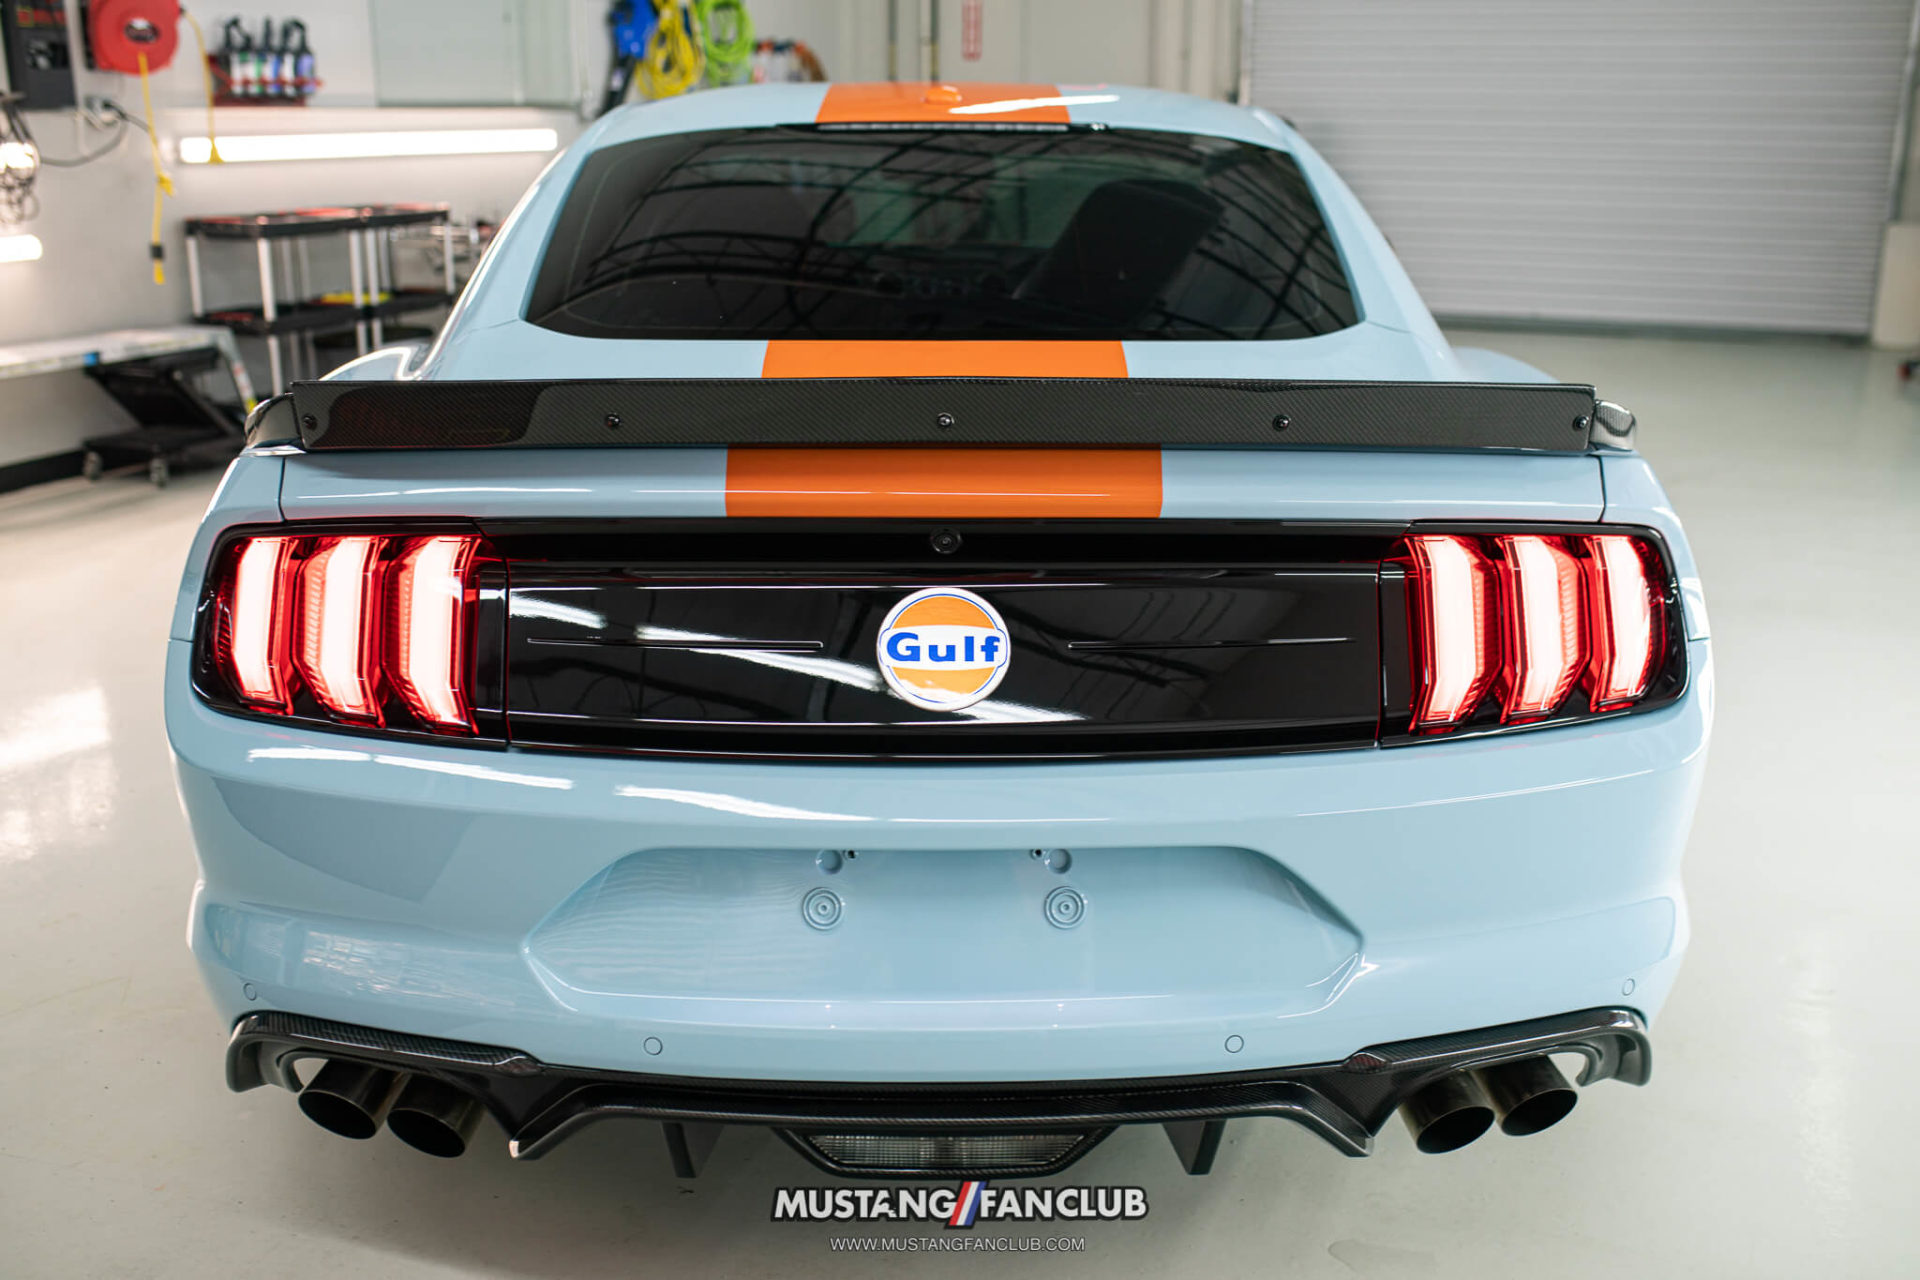 1 of 3 - Gulf Heritage Edition Mustang GT - Mustang Fan Club